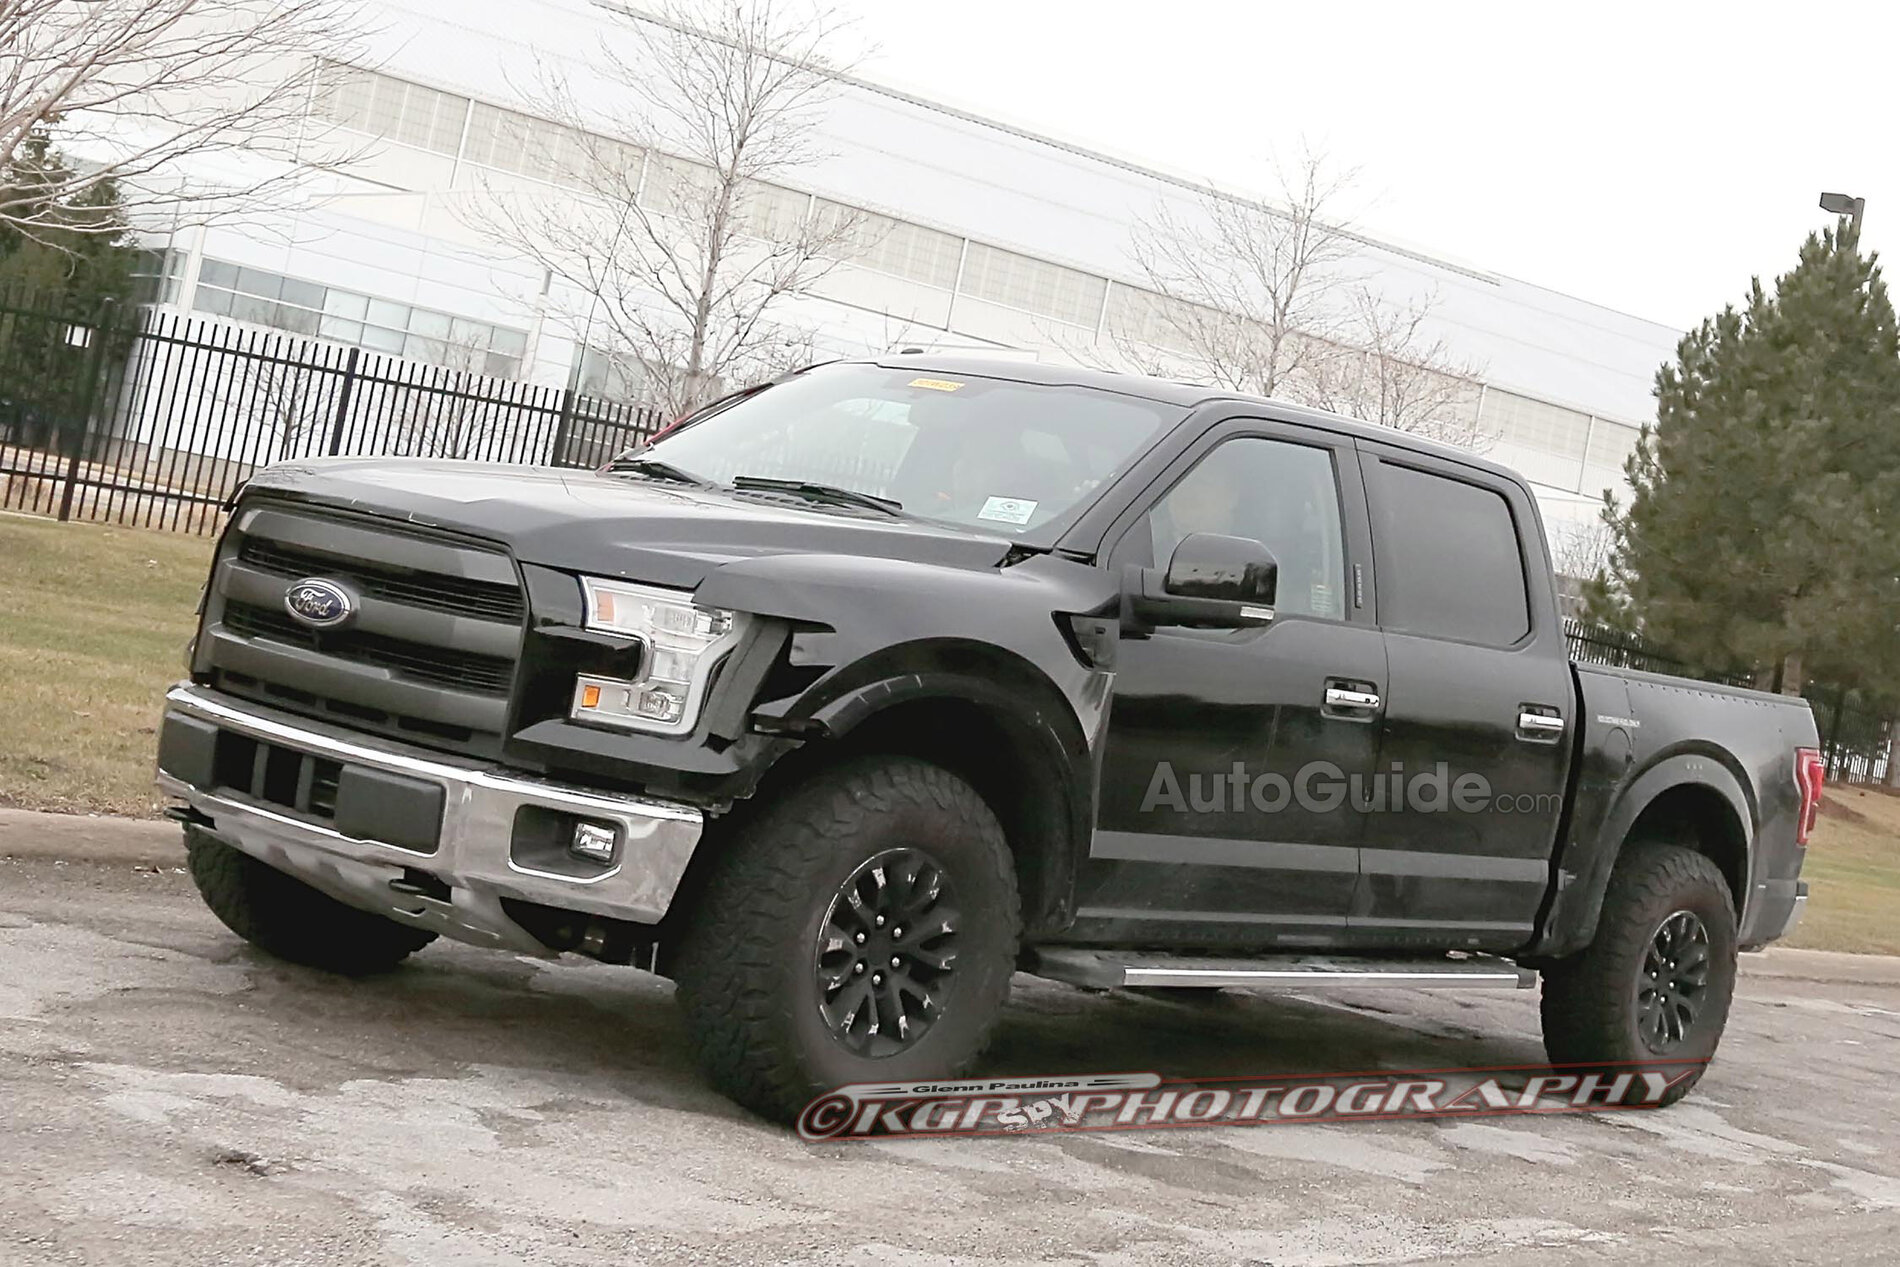 S650 Mustang S650 is out there somewhere, isn't she? Ford-F-150-Mule-Spy-Photo-2